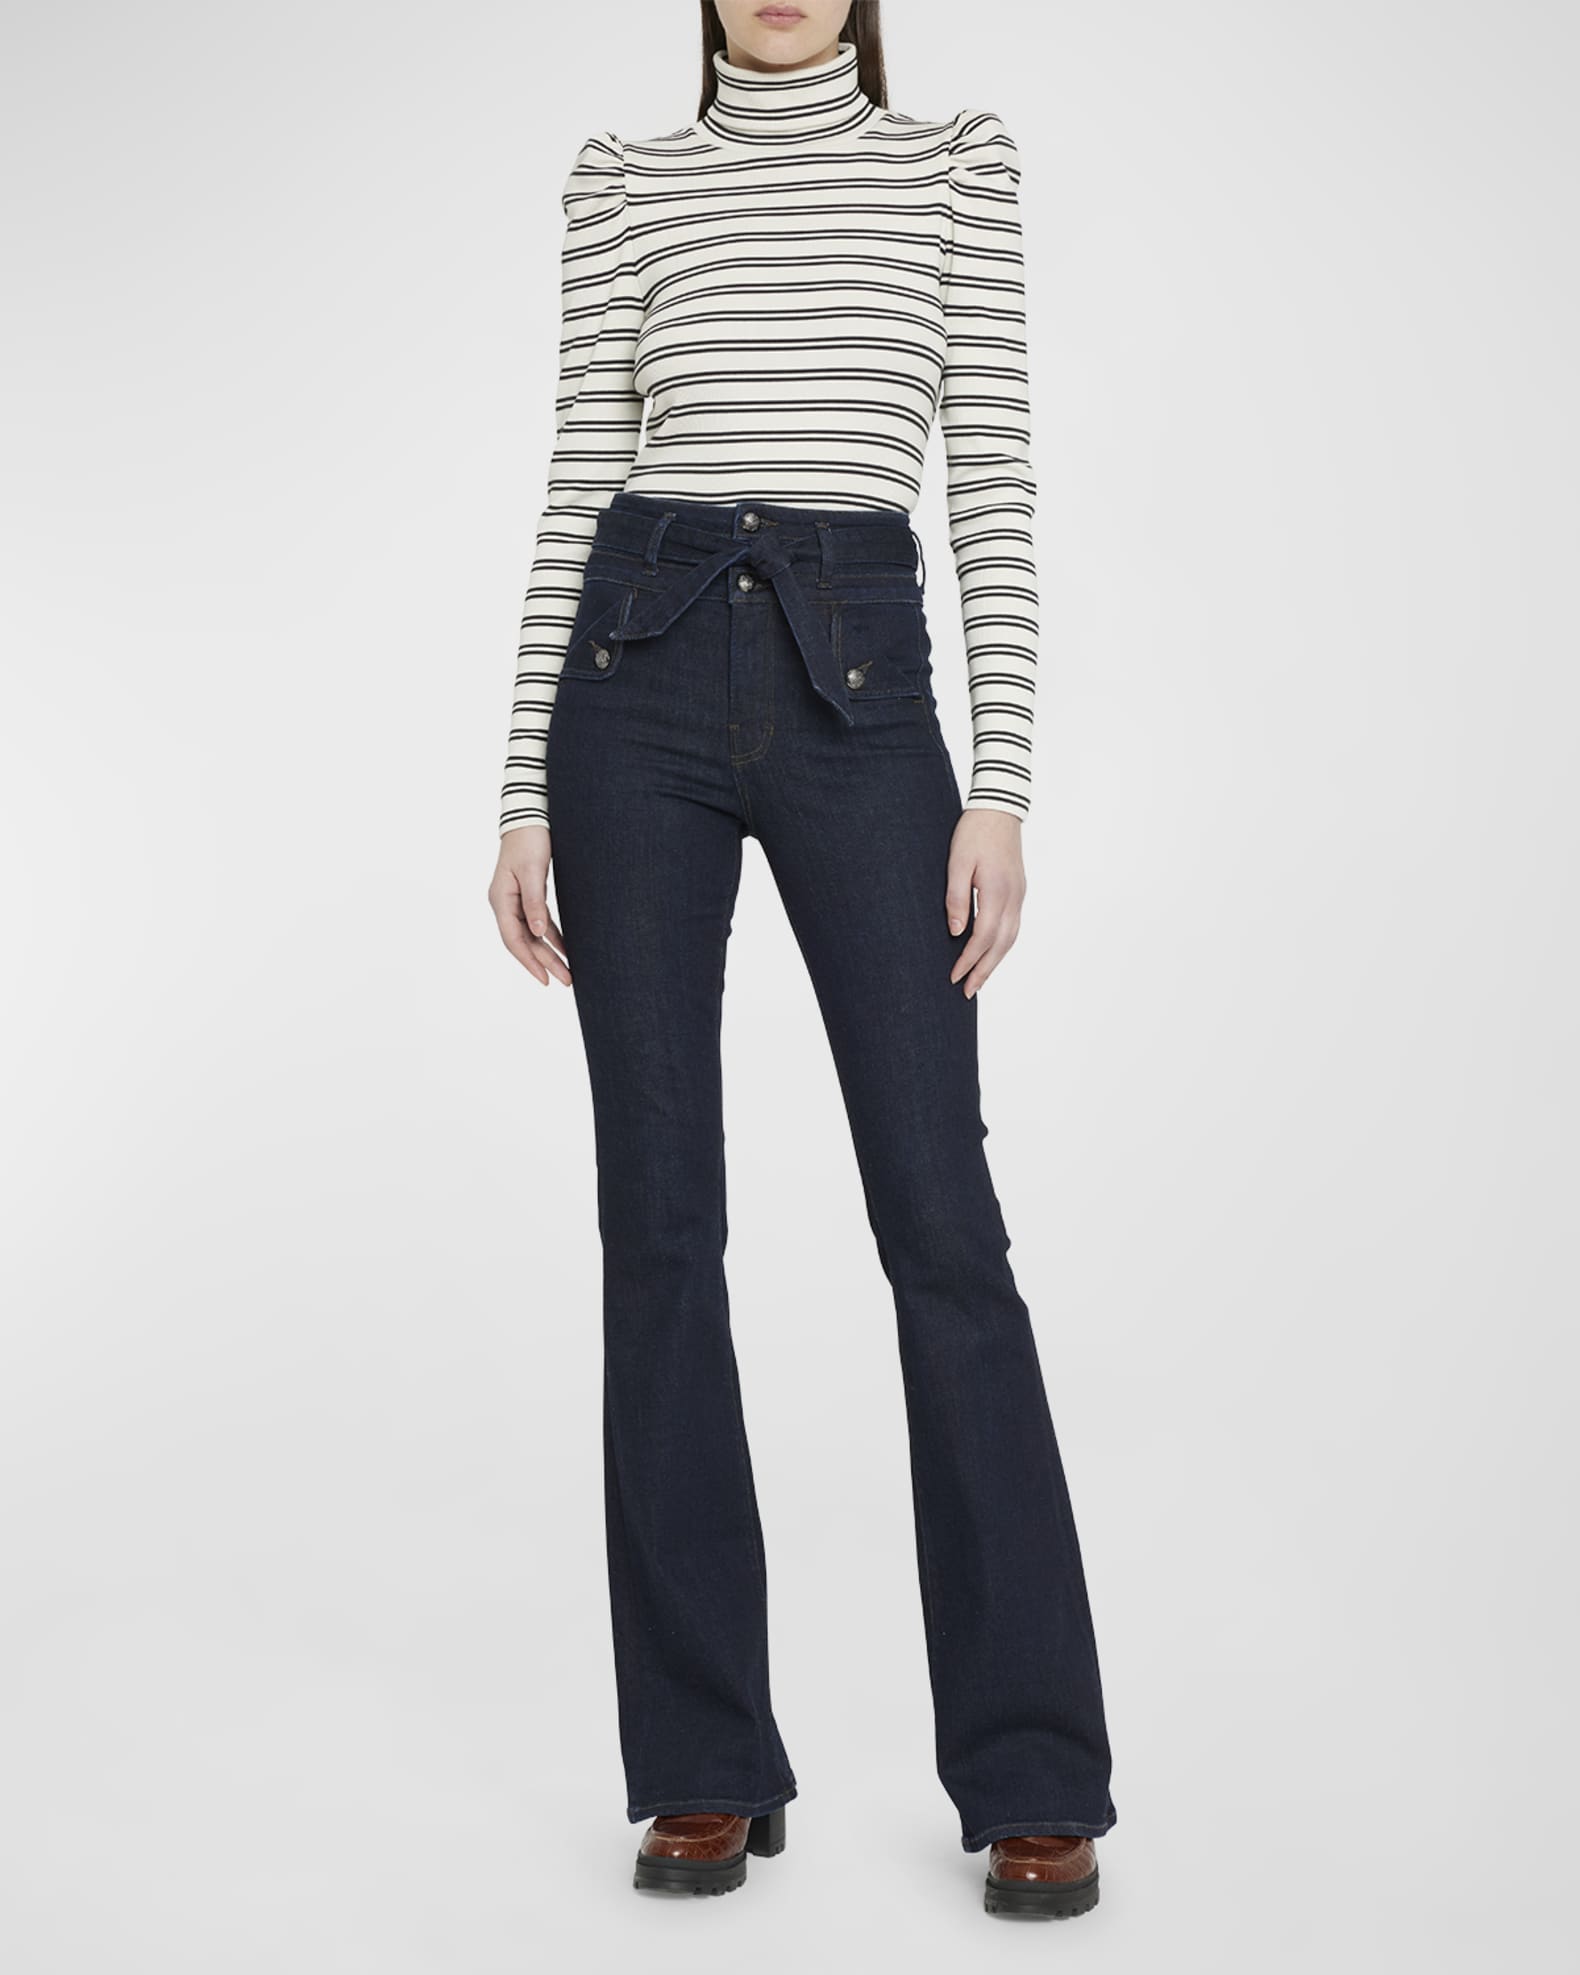 Veronica Beard Jeans Giselle High Rise Skinny Flare Jeans | Neiman Marcus